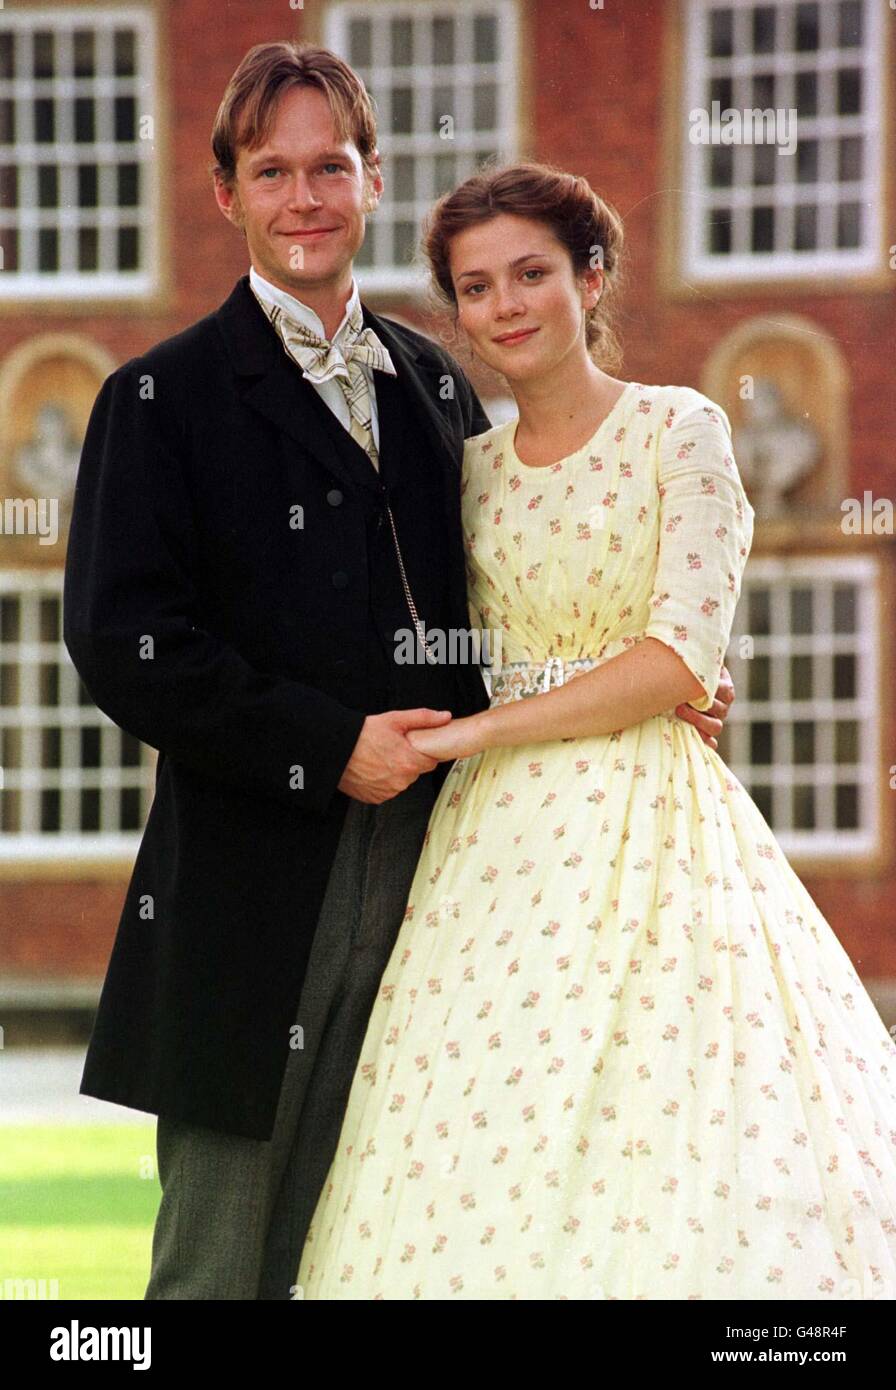 Two members of the cast of 'Mutual Friend', Steven Mackintosh and Anna Friel during filming in Warwickshire. Stock Photo